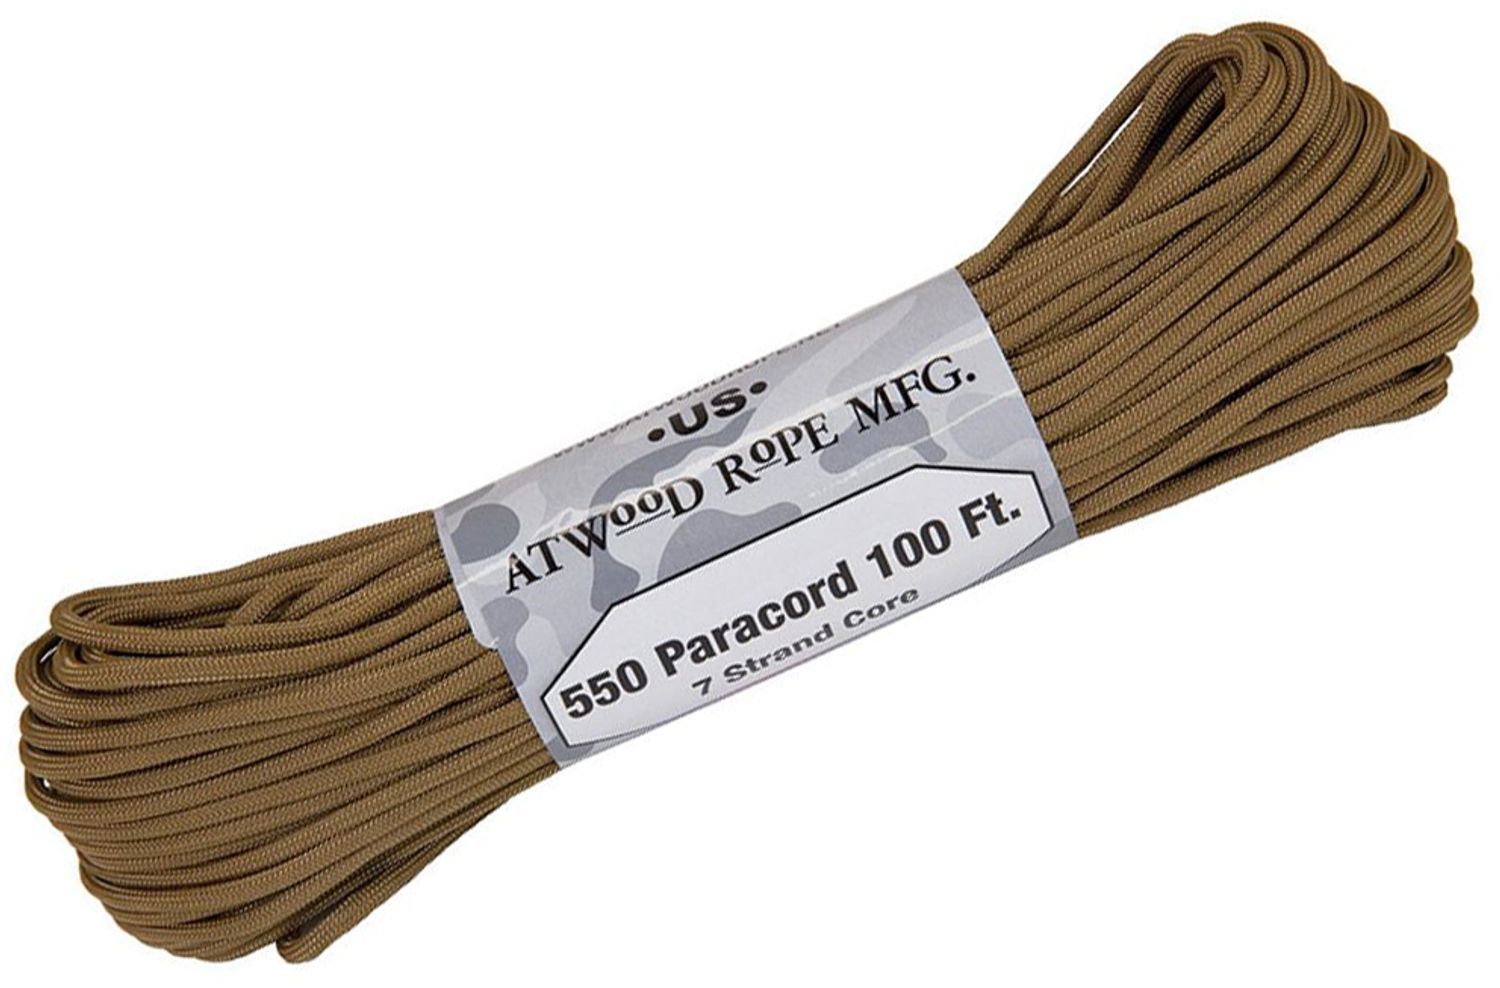 Atwood Rope 550 Paracord, Coyote, 100 Feet - KnifeCenter - RG1225H